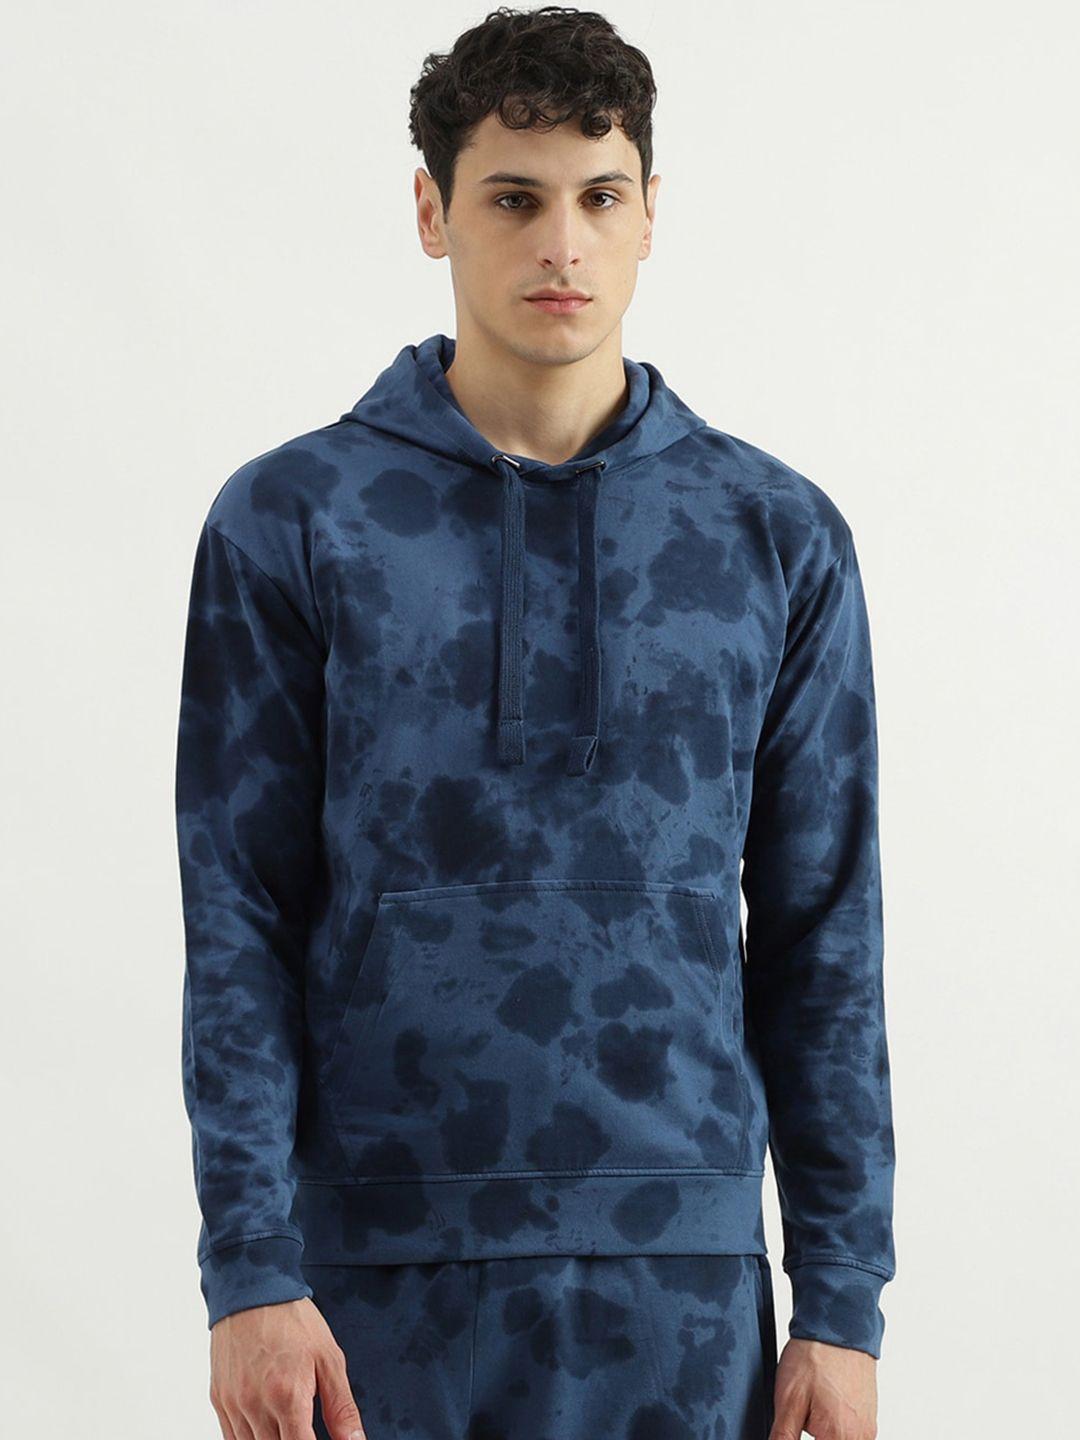 united colors of benetton abstract printed cotton hooded pullover sweatshirt